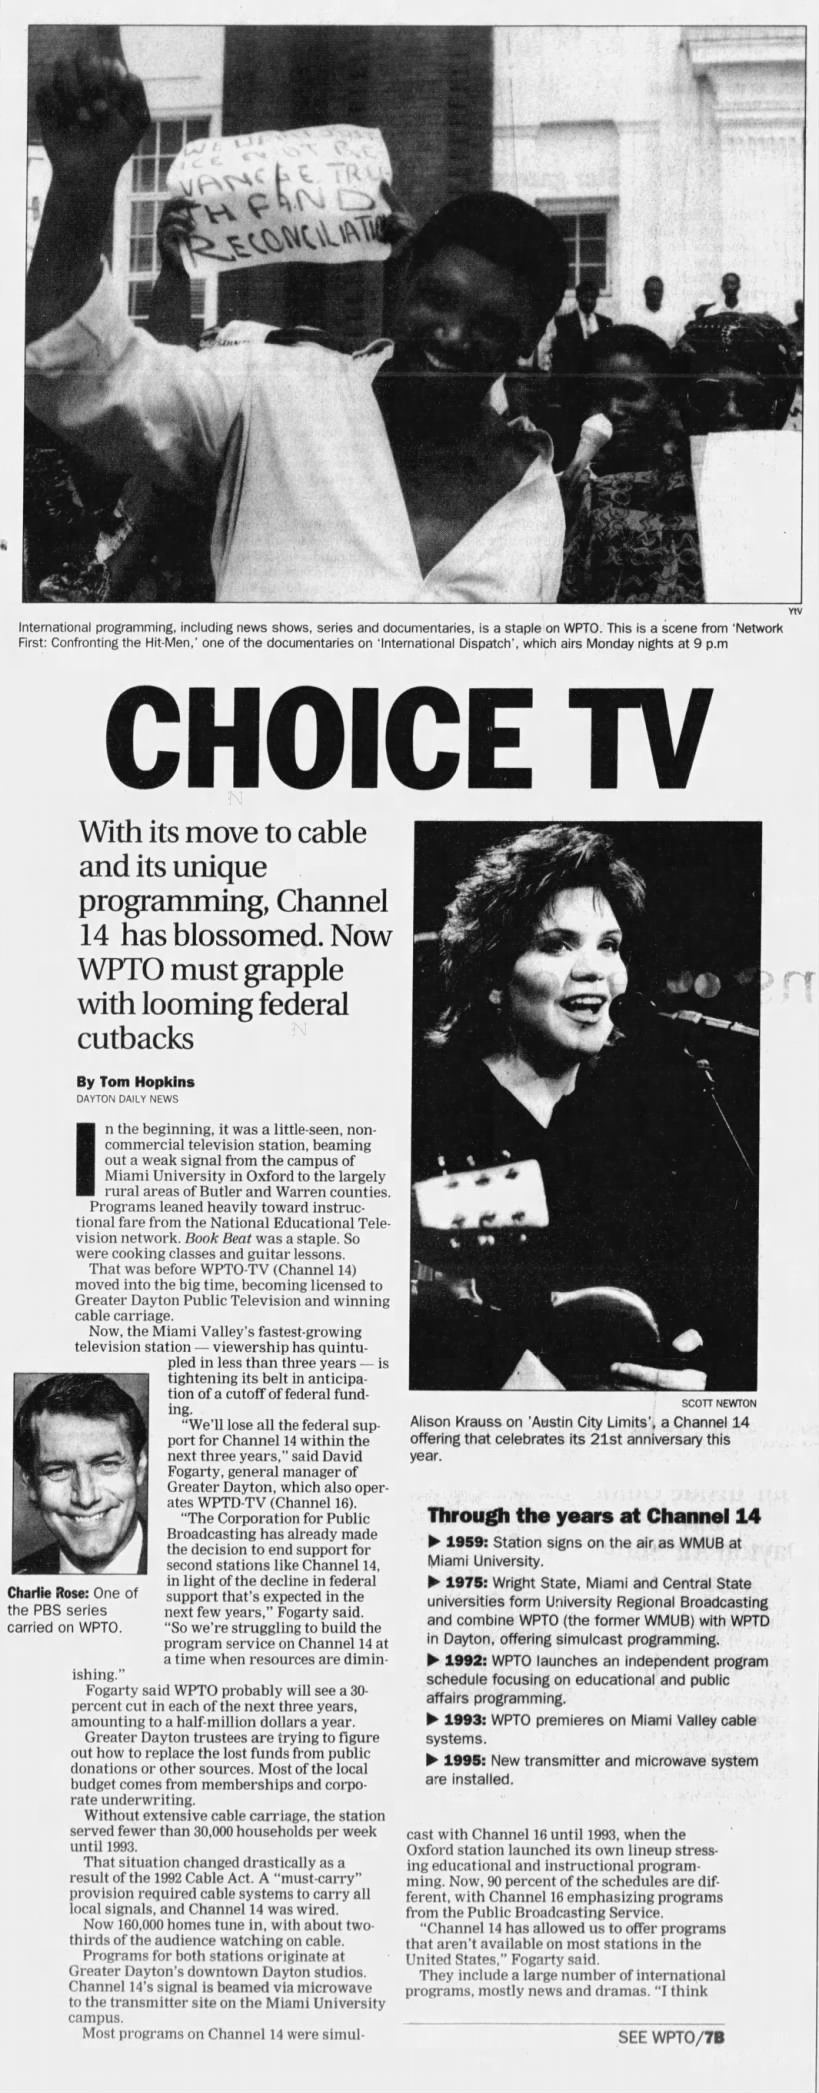 Choice TV: With its move to cable and its unique programming, Channel 14 has blossomed. Now WPTO